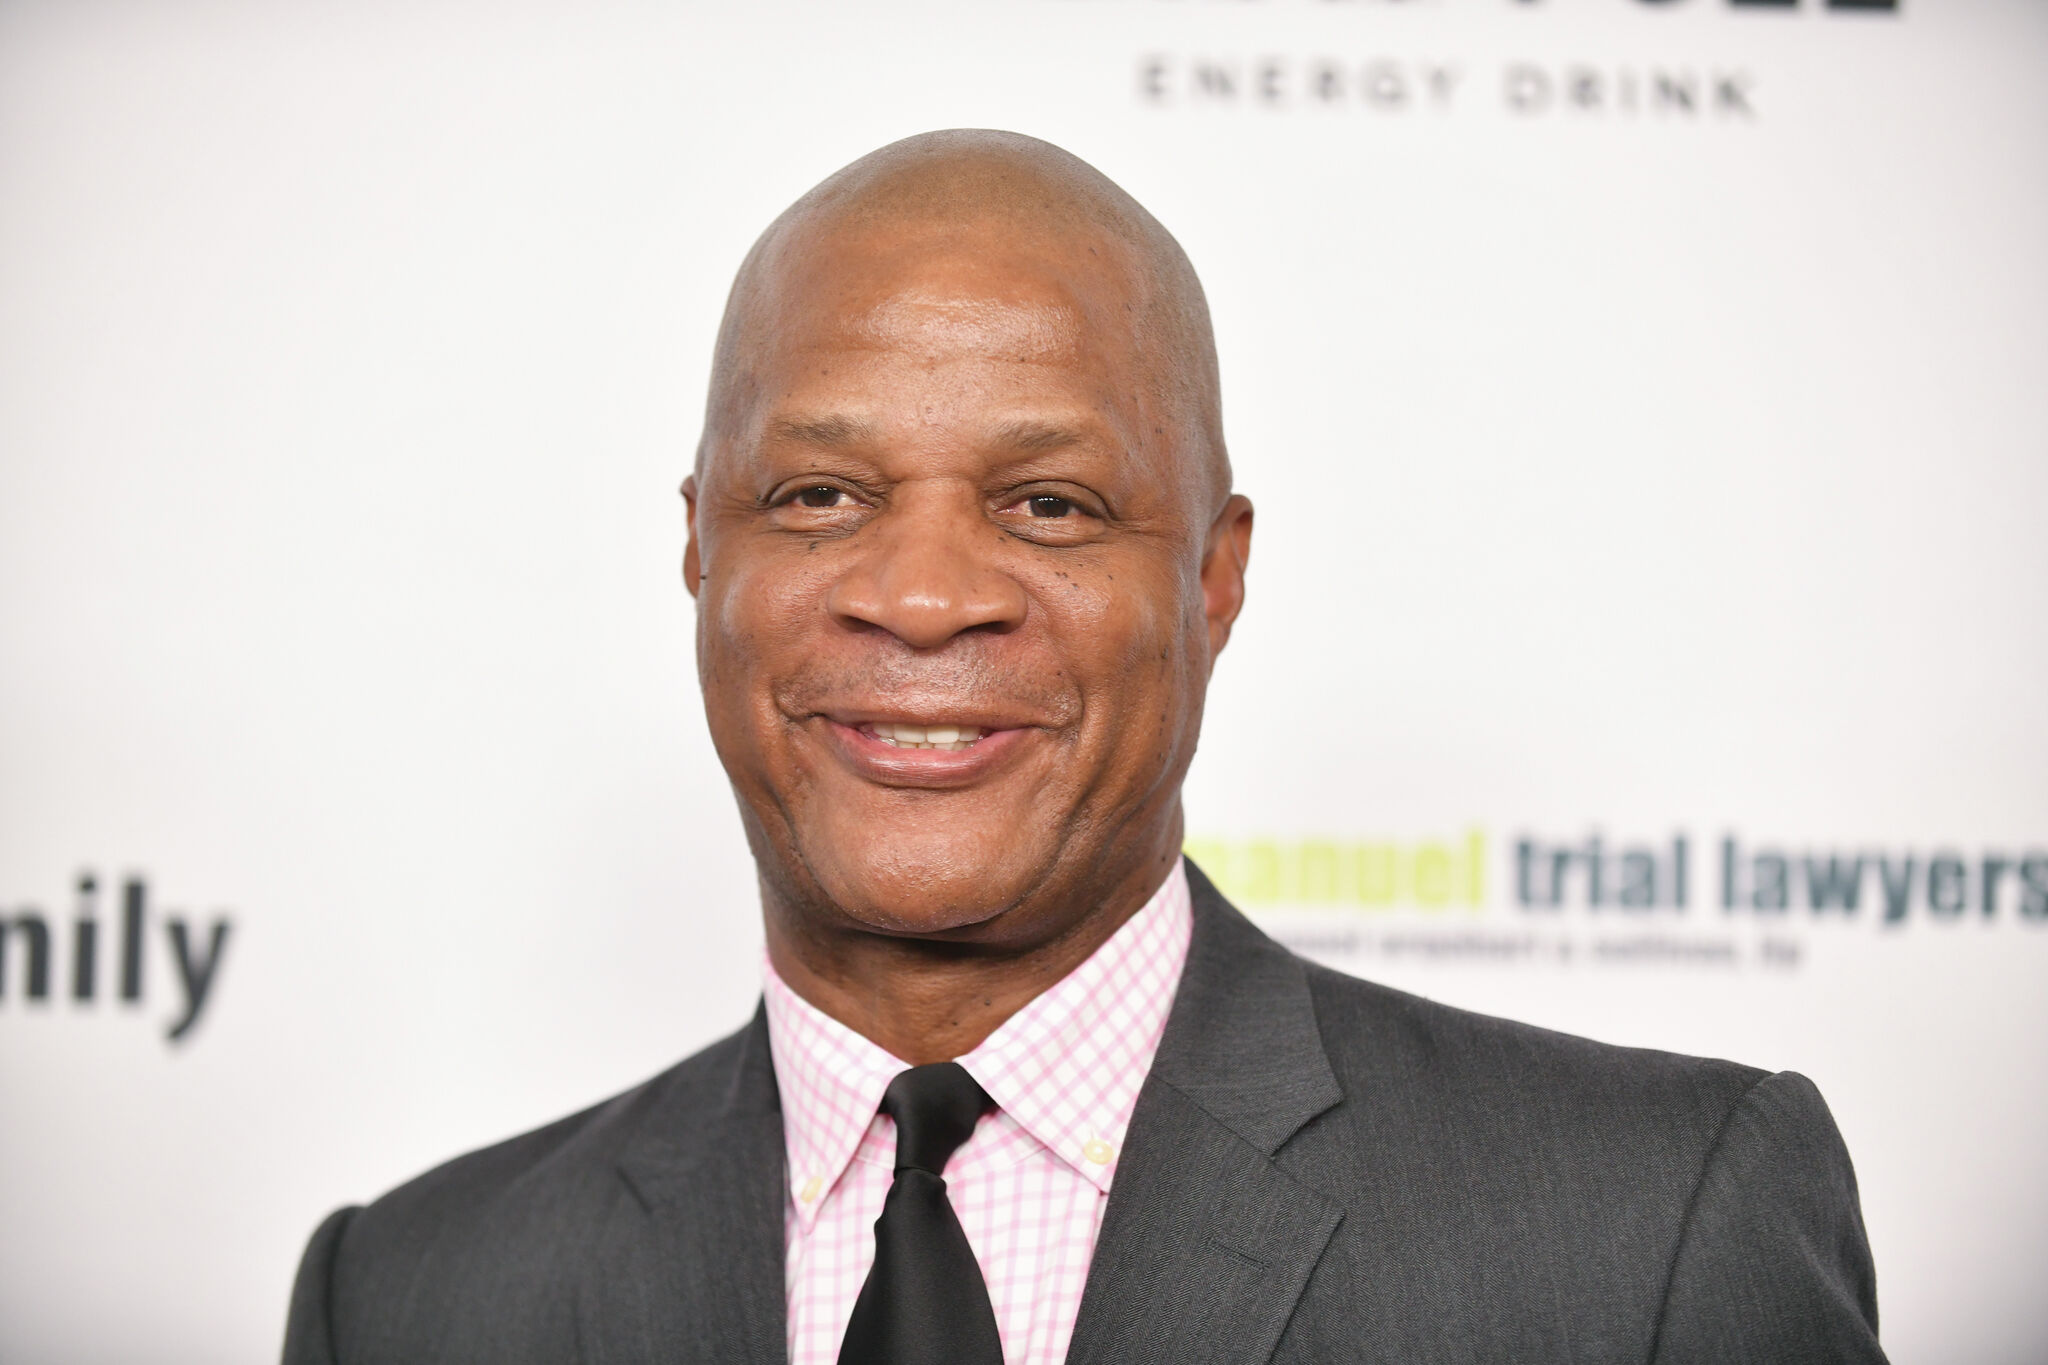 Darryl Strawberry (Part One) Rookie of the Year to World Champion